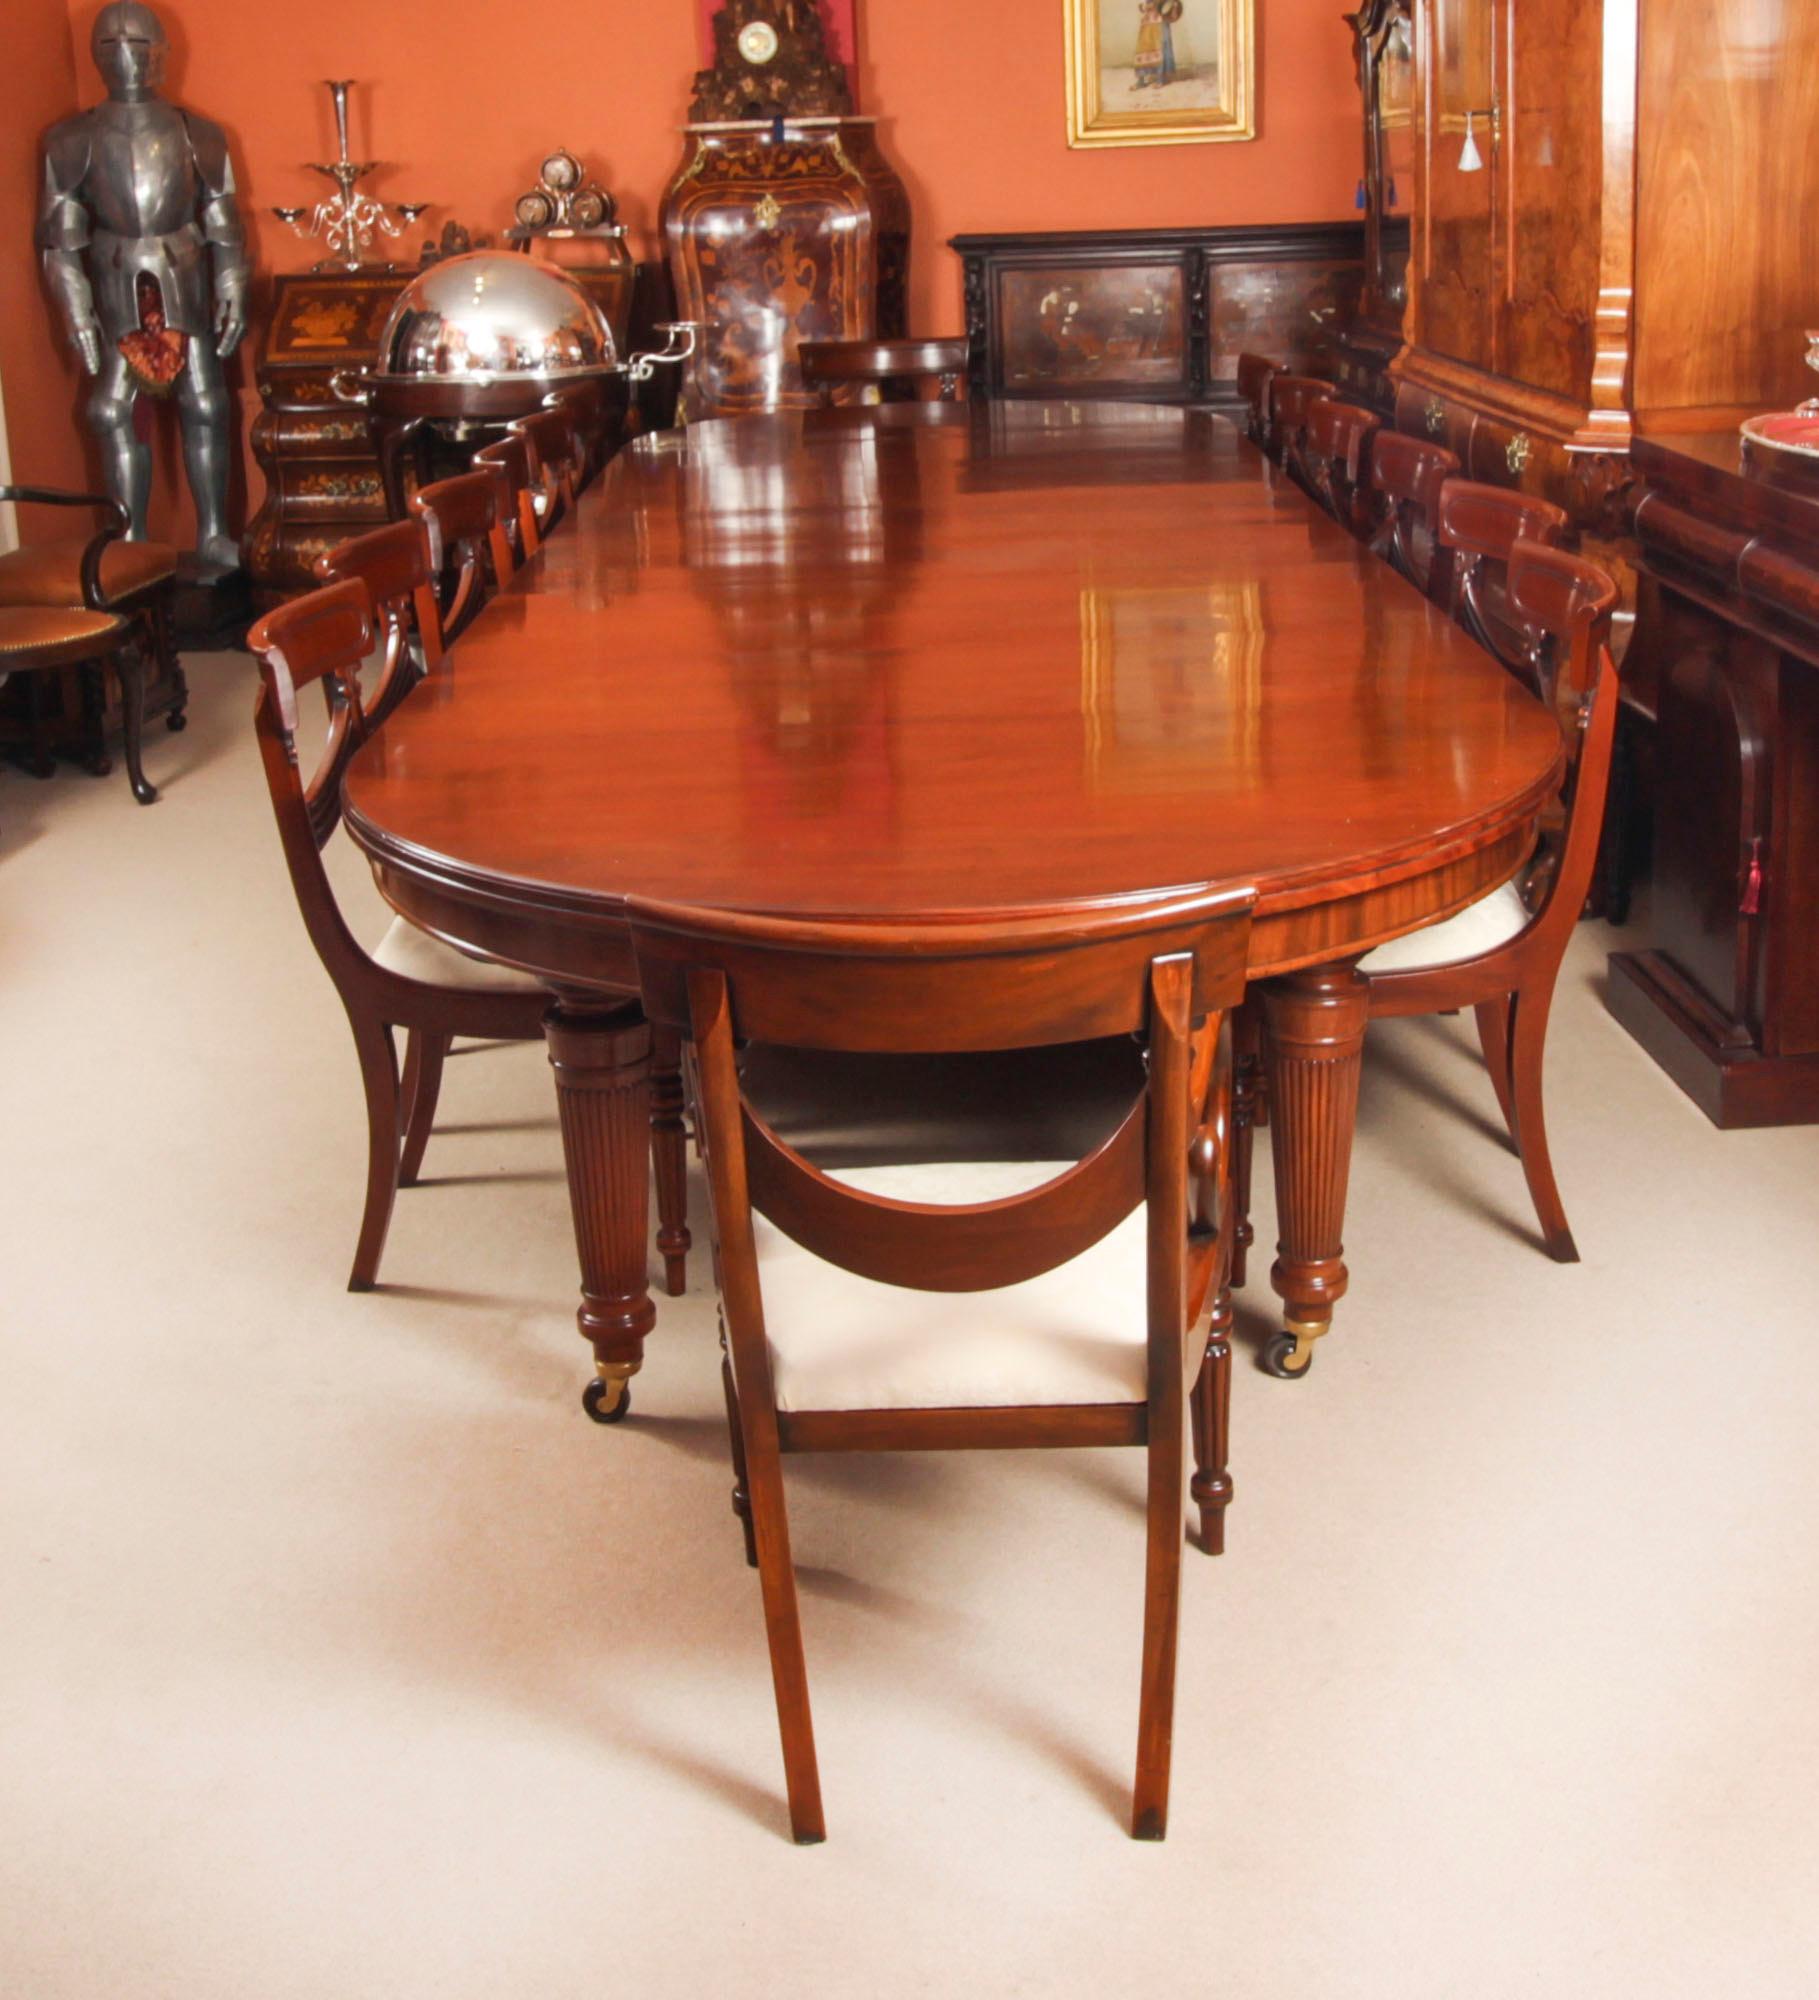 This is a beautiful dining set comprising an antique late Victorian extending dining table by the renowned Victorian cabinet makers, Edwards and Roberts, circa 1880 in date, and a set of sixteen Regency Revival dining chairs.

This amazing table can